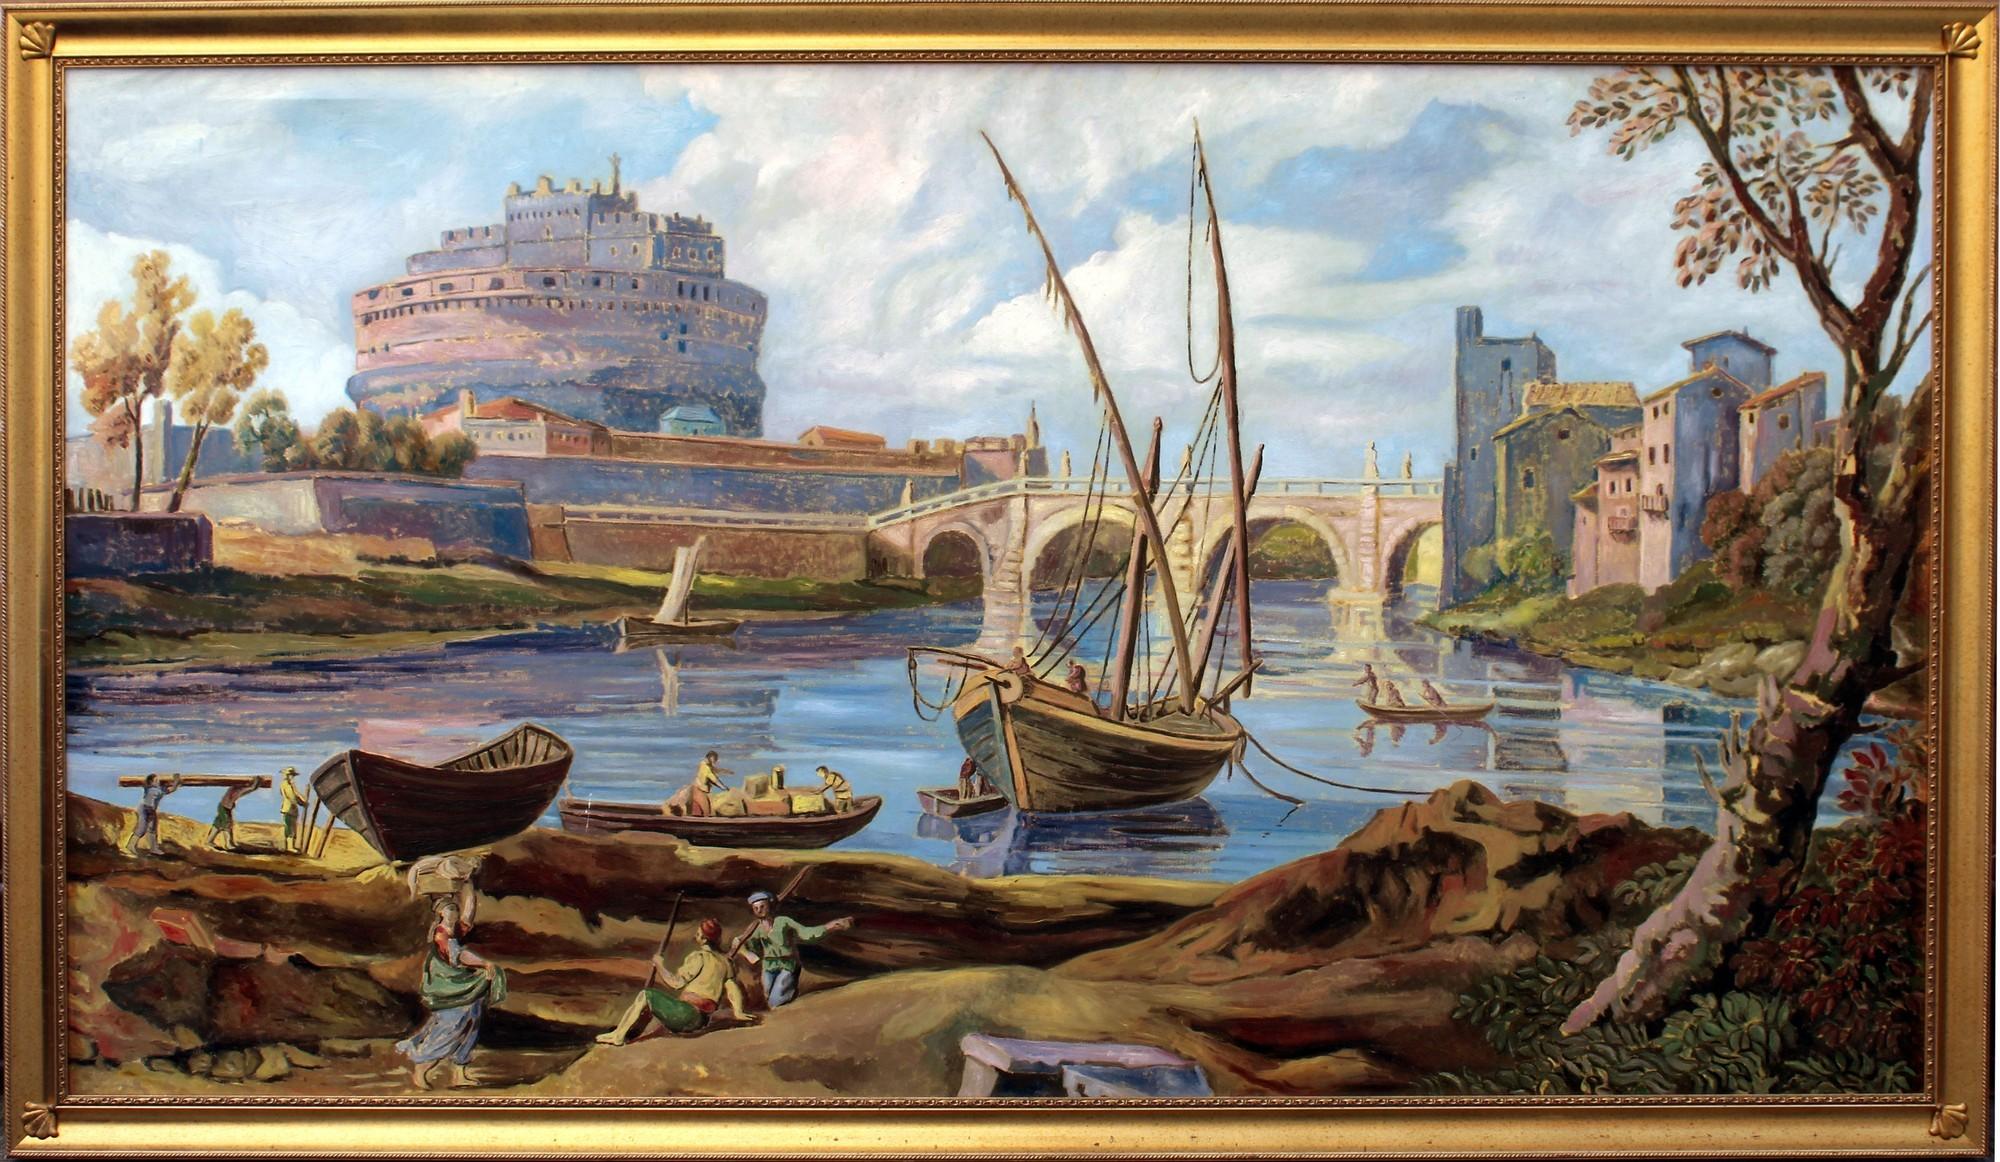 Giovanni Battista Busiri Figurative Painting - Large Landscape Oil Painting Of Rome With Castel Sant'Angelo and Tiber River 